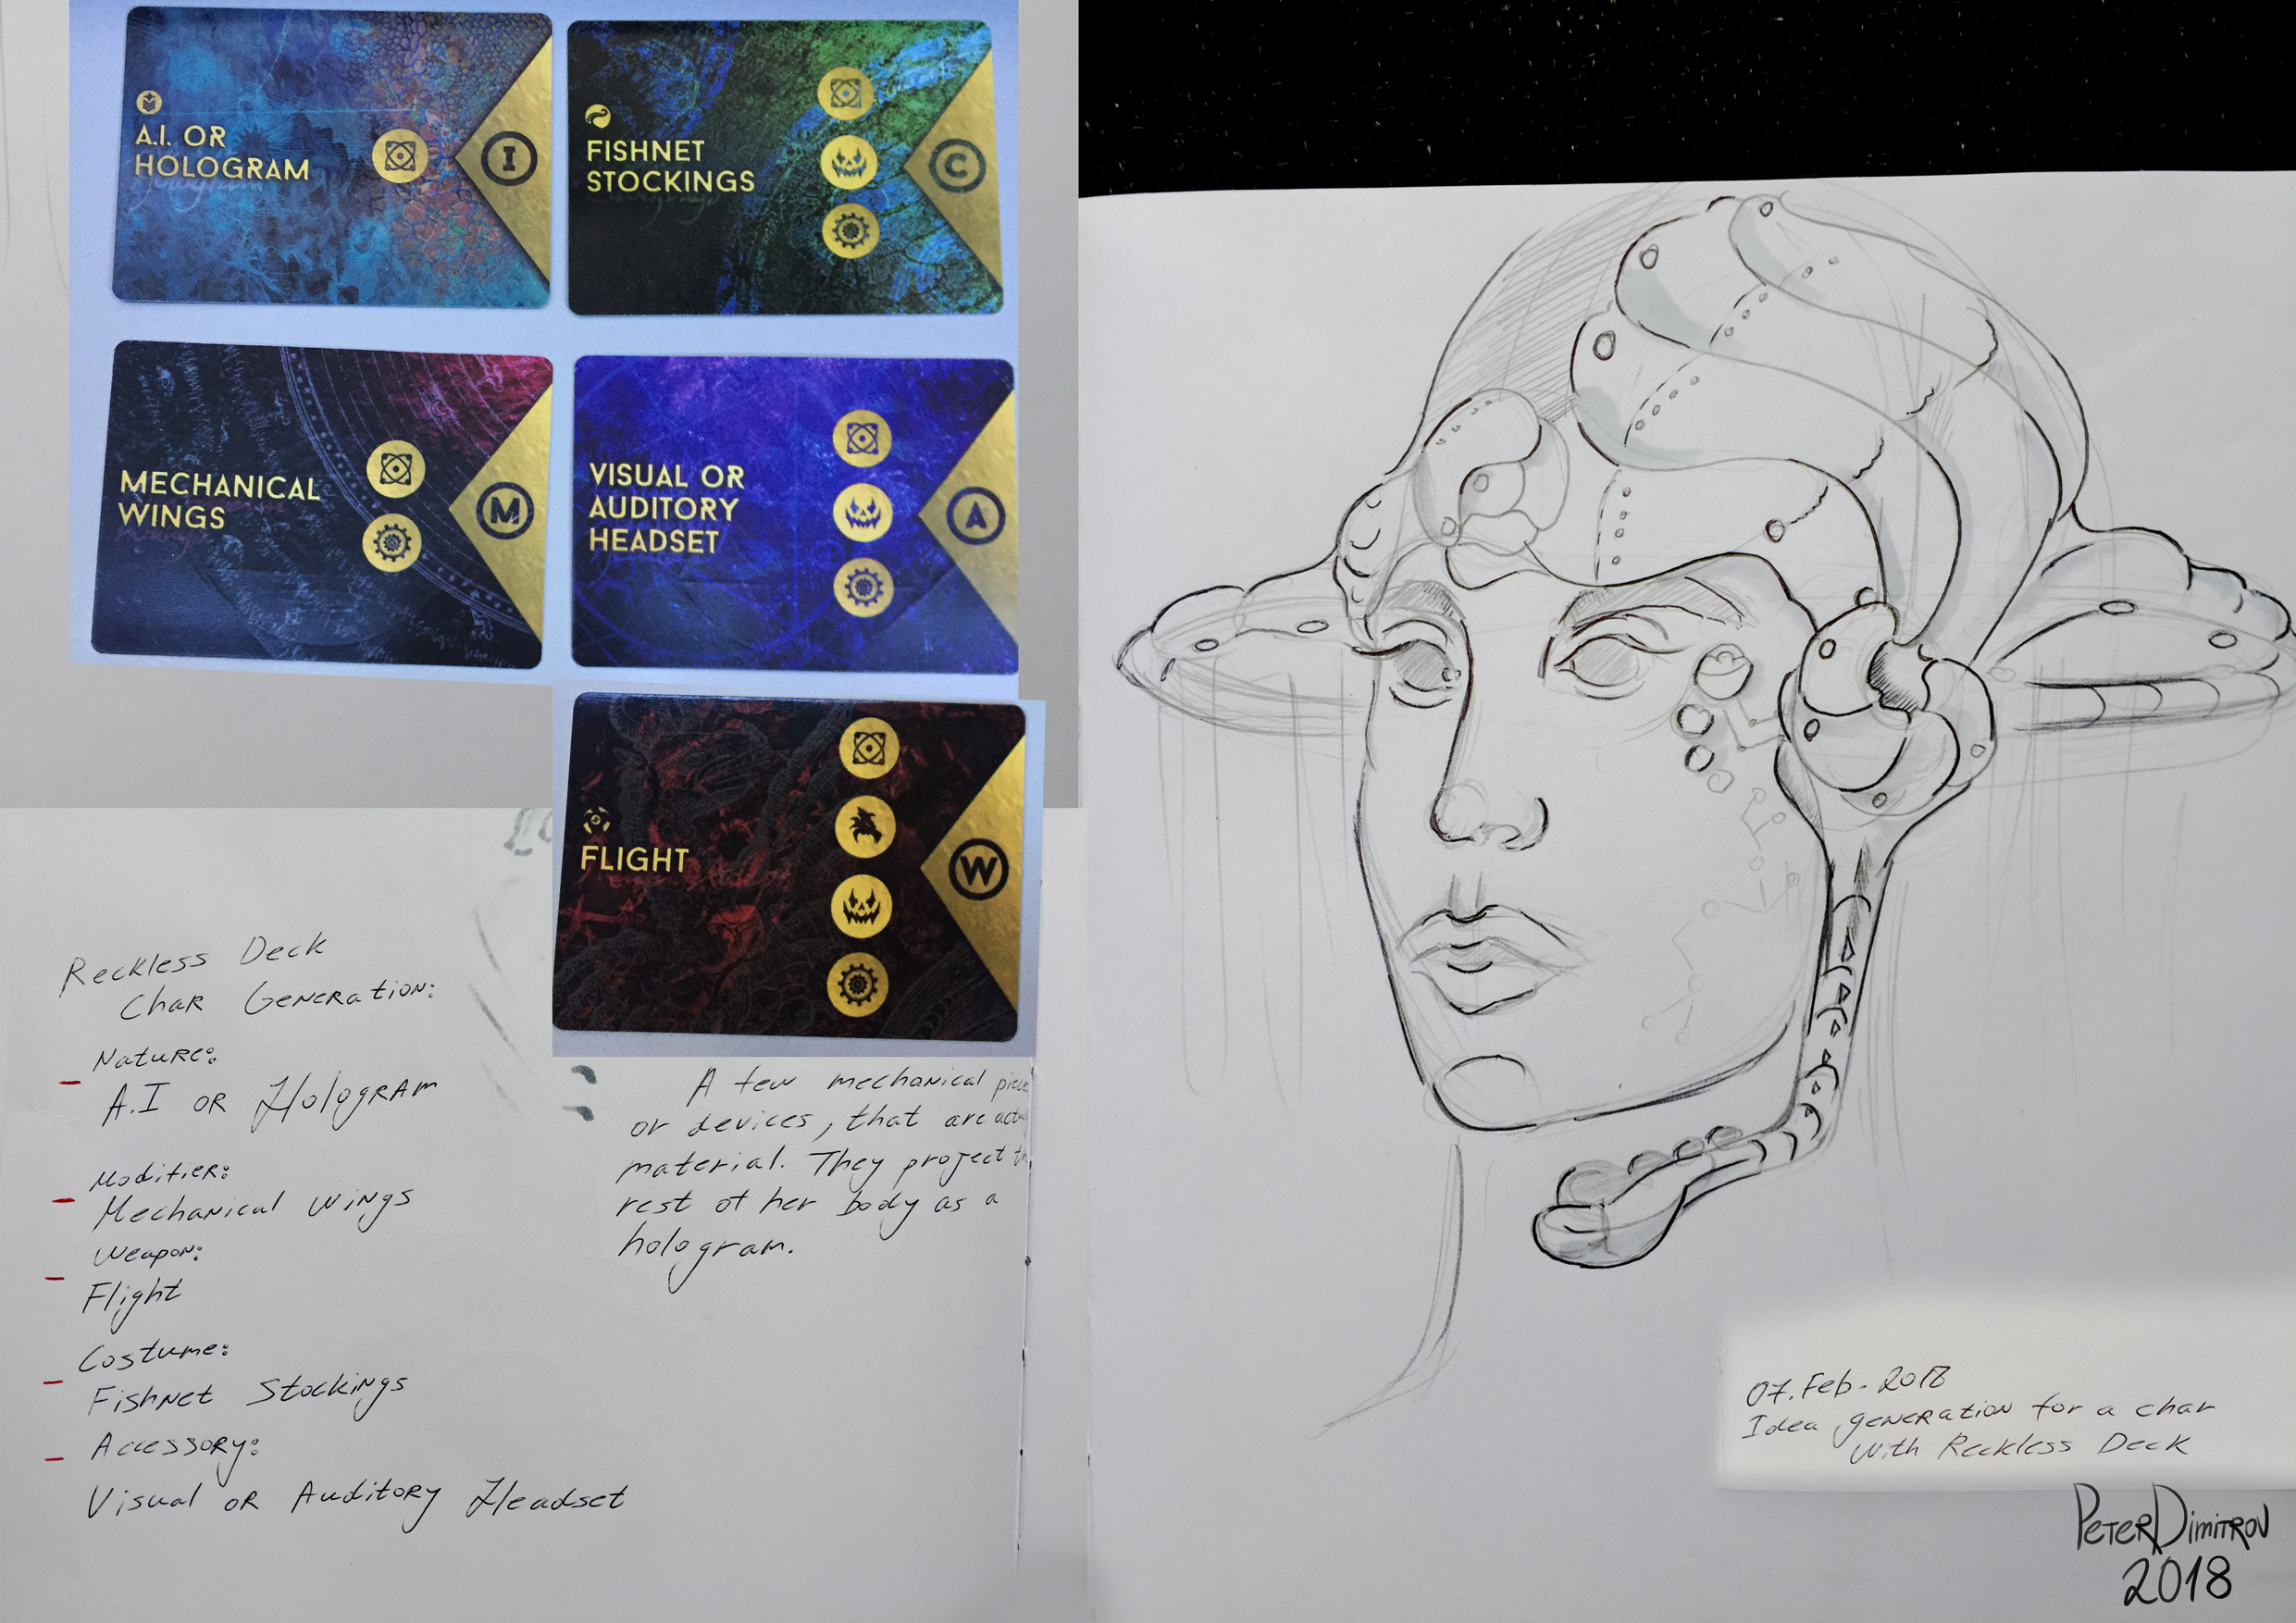 To the left are randomly picked cards from the Reckless Deck. To the right is the portrait sketch I started the painting with. The sketch showcases the AI character with her sci-fi headset.